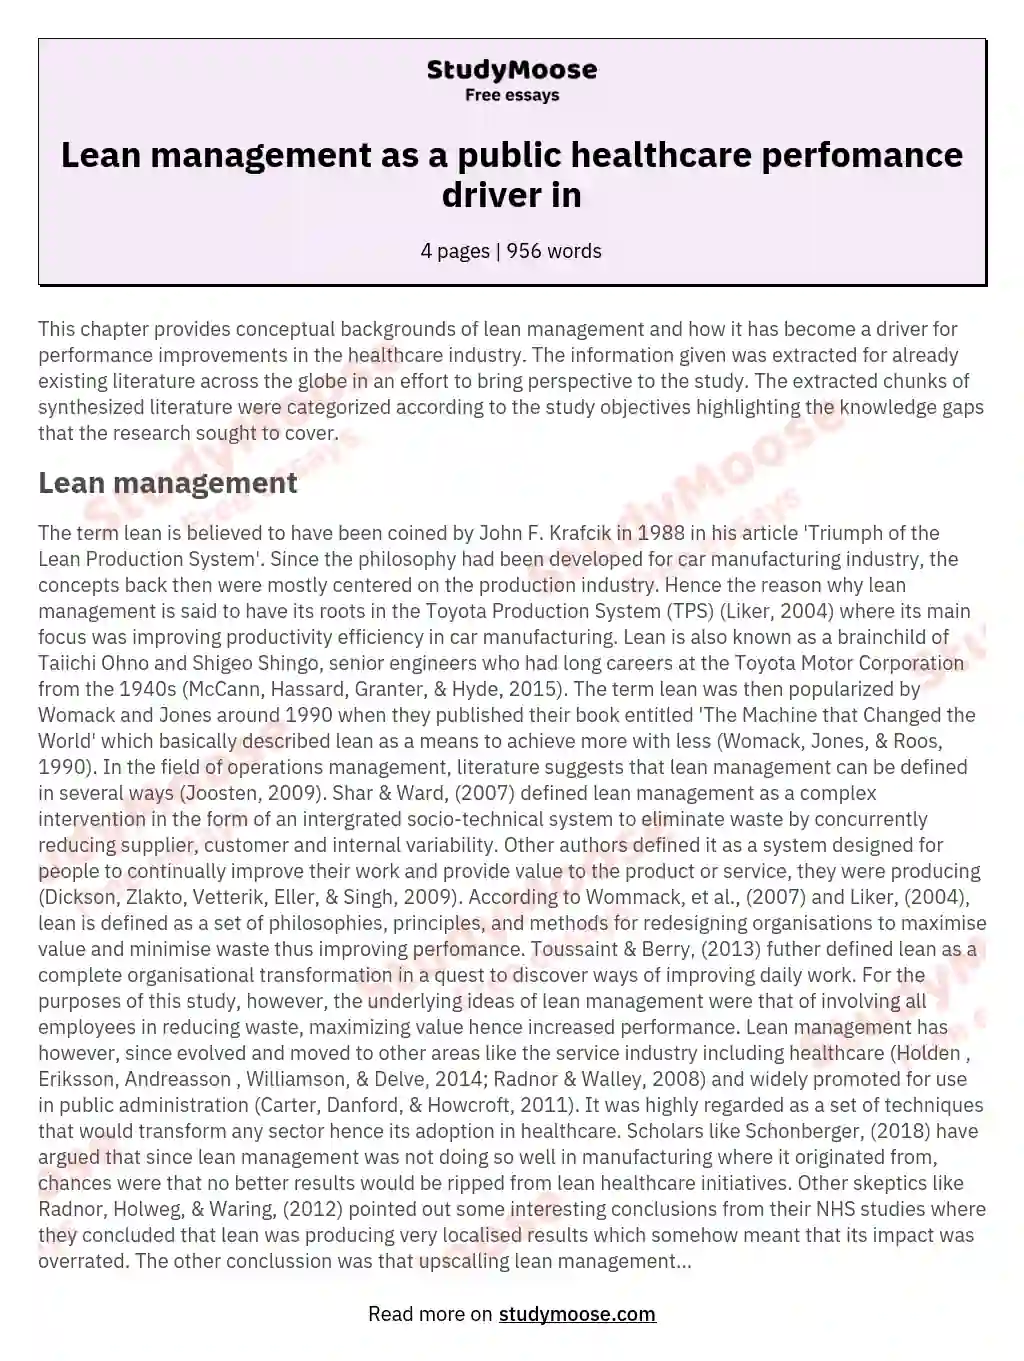 Lean management as a public healthcare perfomance driver in